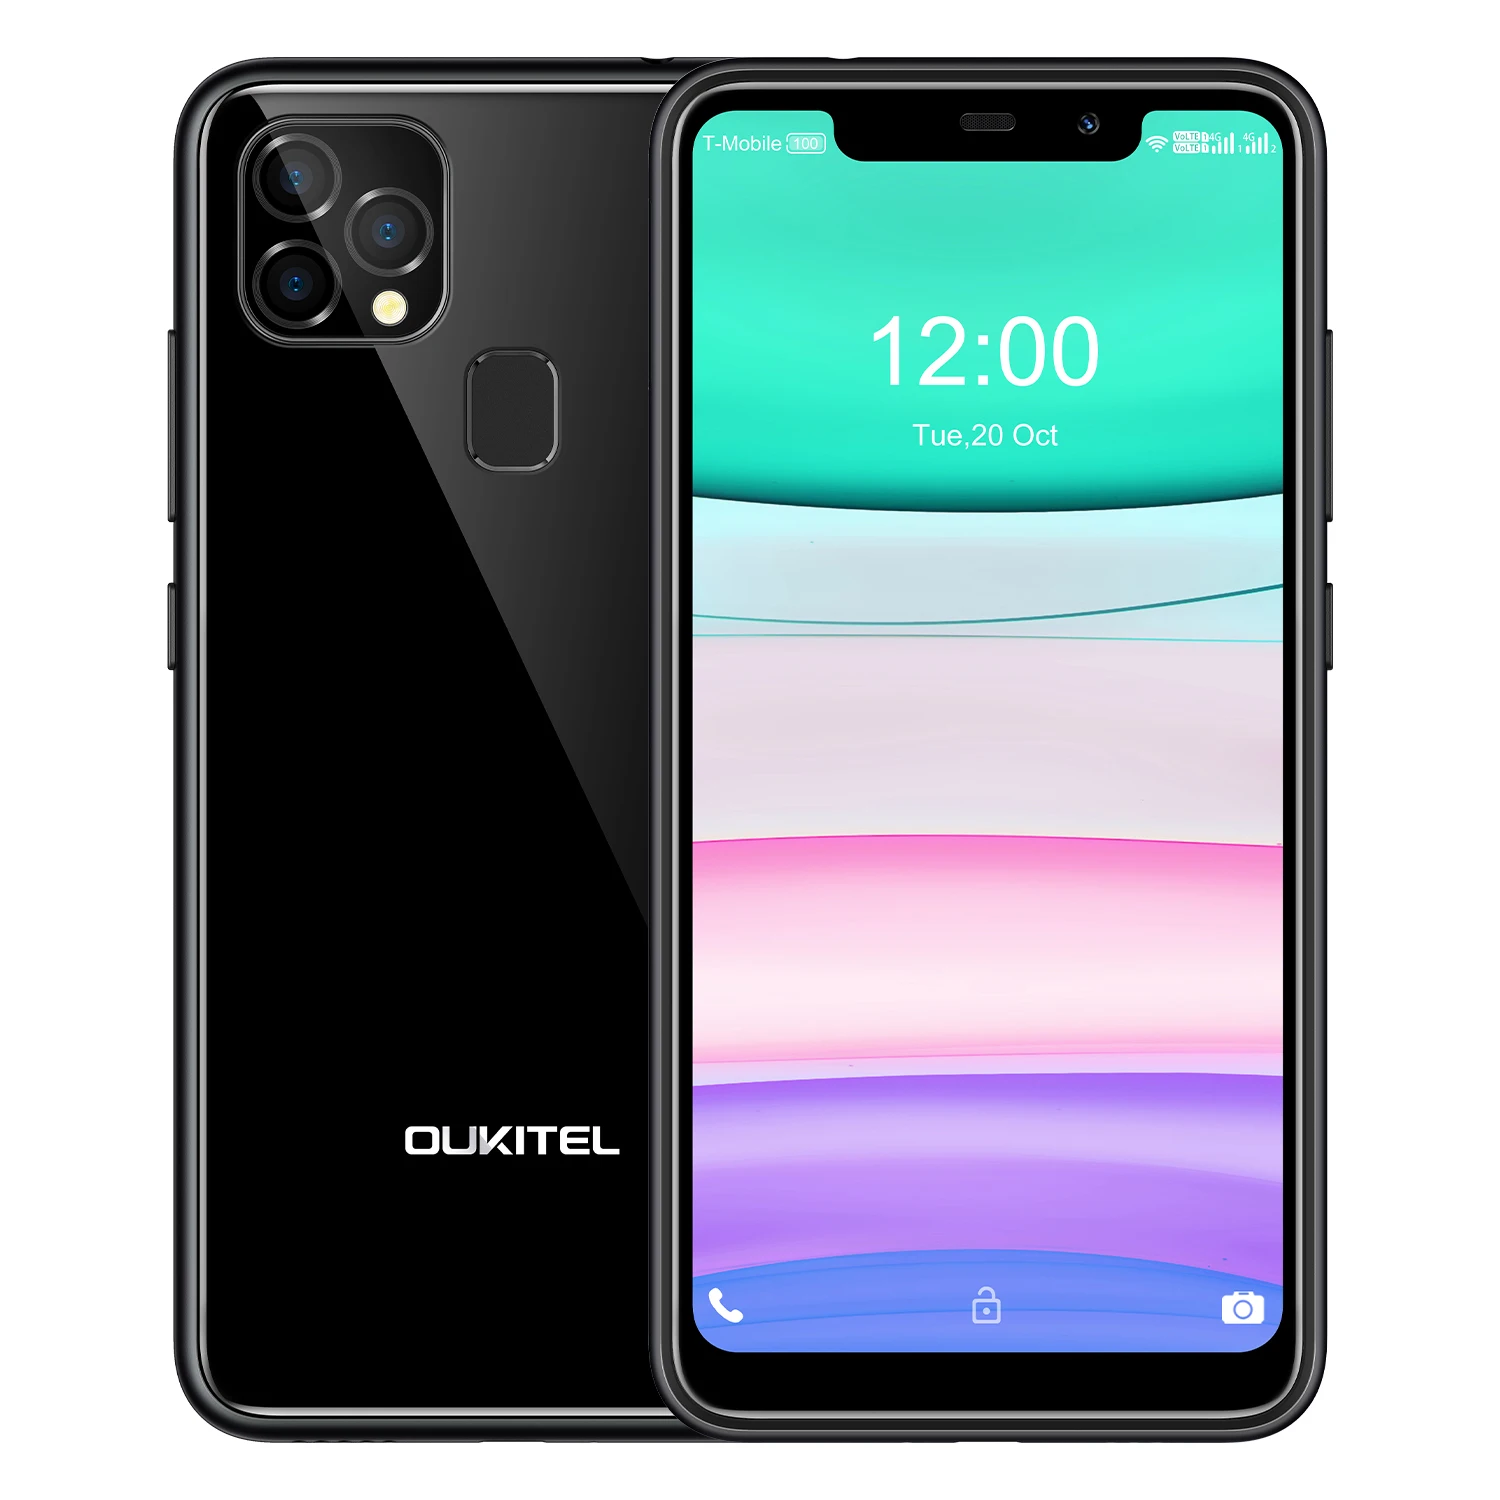 

Newest OUKITEL C22 5.86 inch Android 10.0 Triple Camera Light Weight 2.5D Glass Back 4GB RAM 128GB ROM 2021 4G Smartphone, Green,black